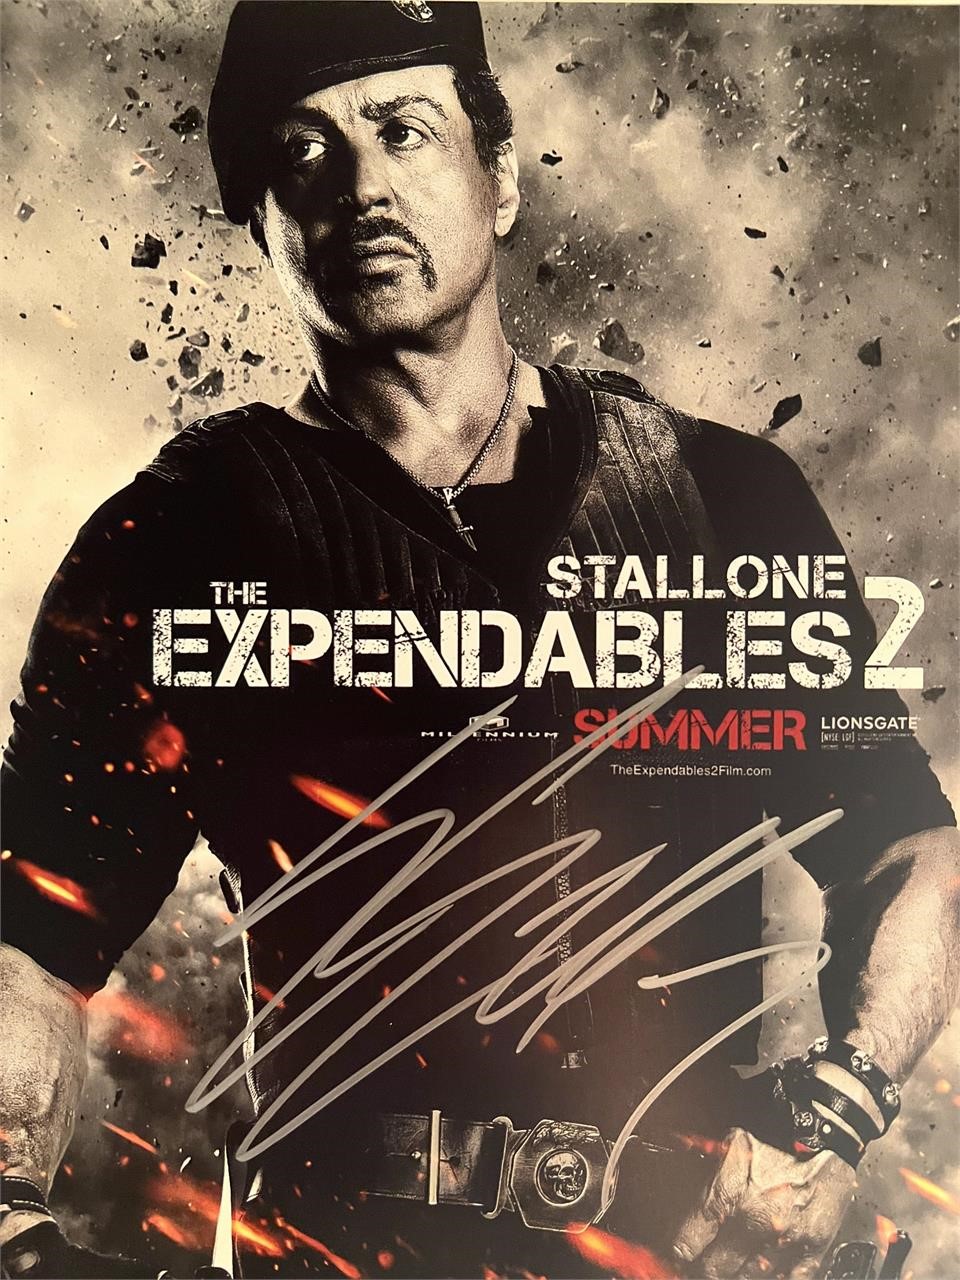 The Expendables 2 Sylvester Stallone signed photo